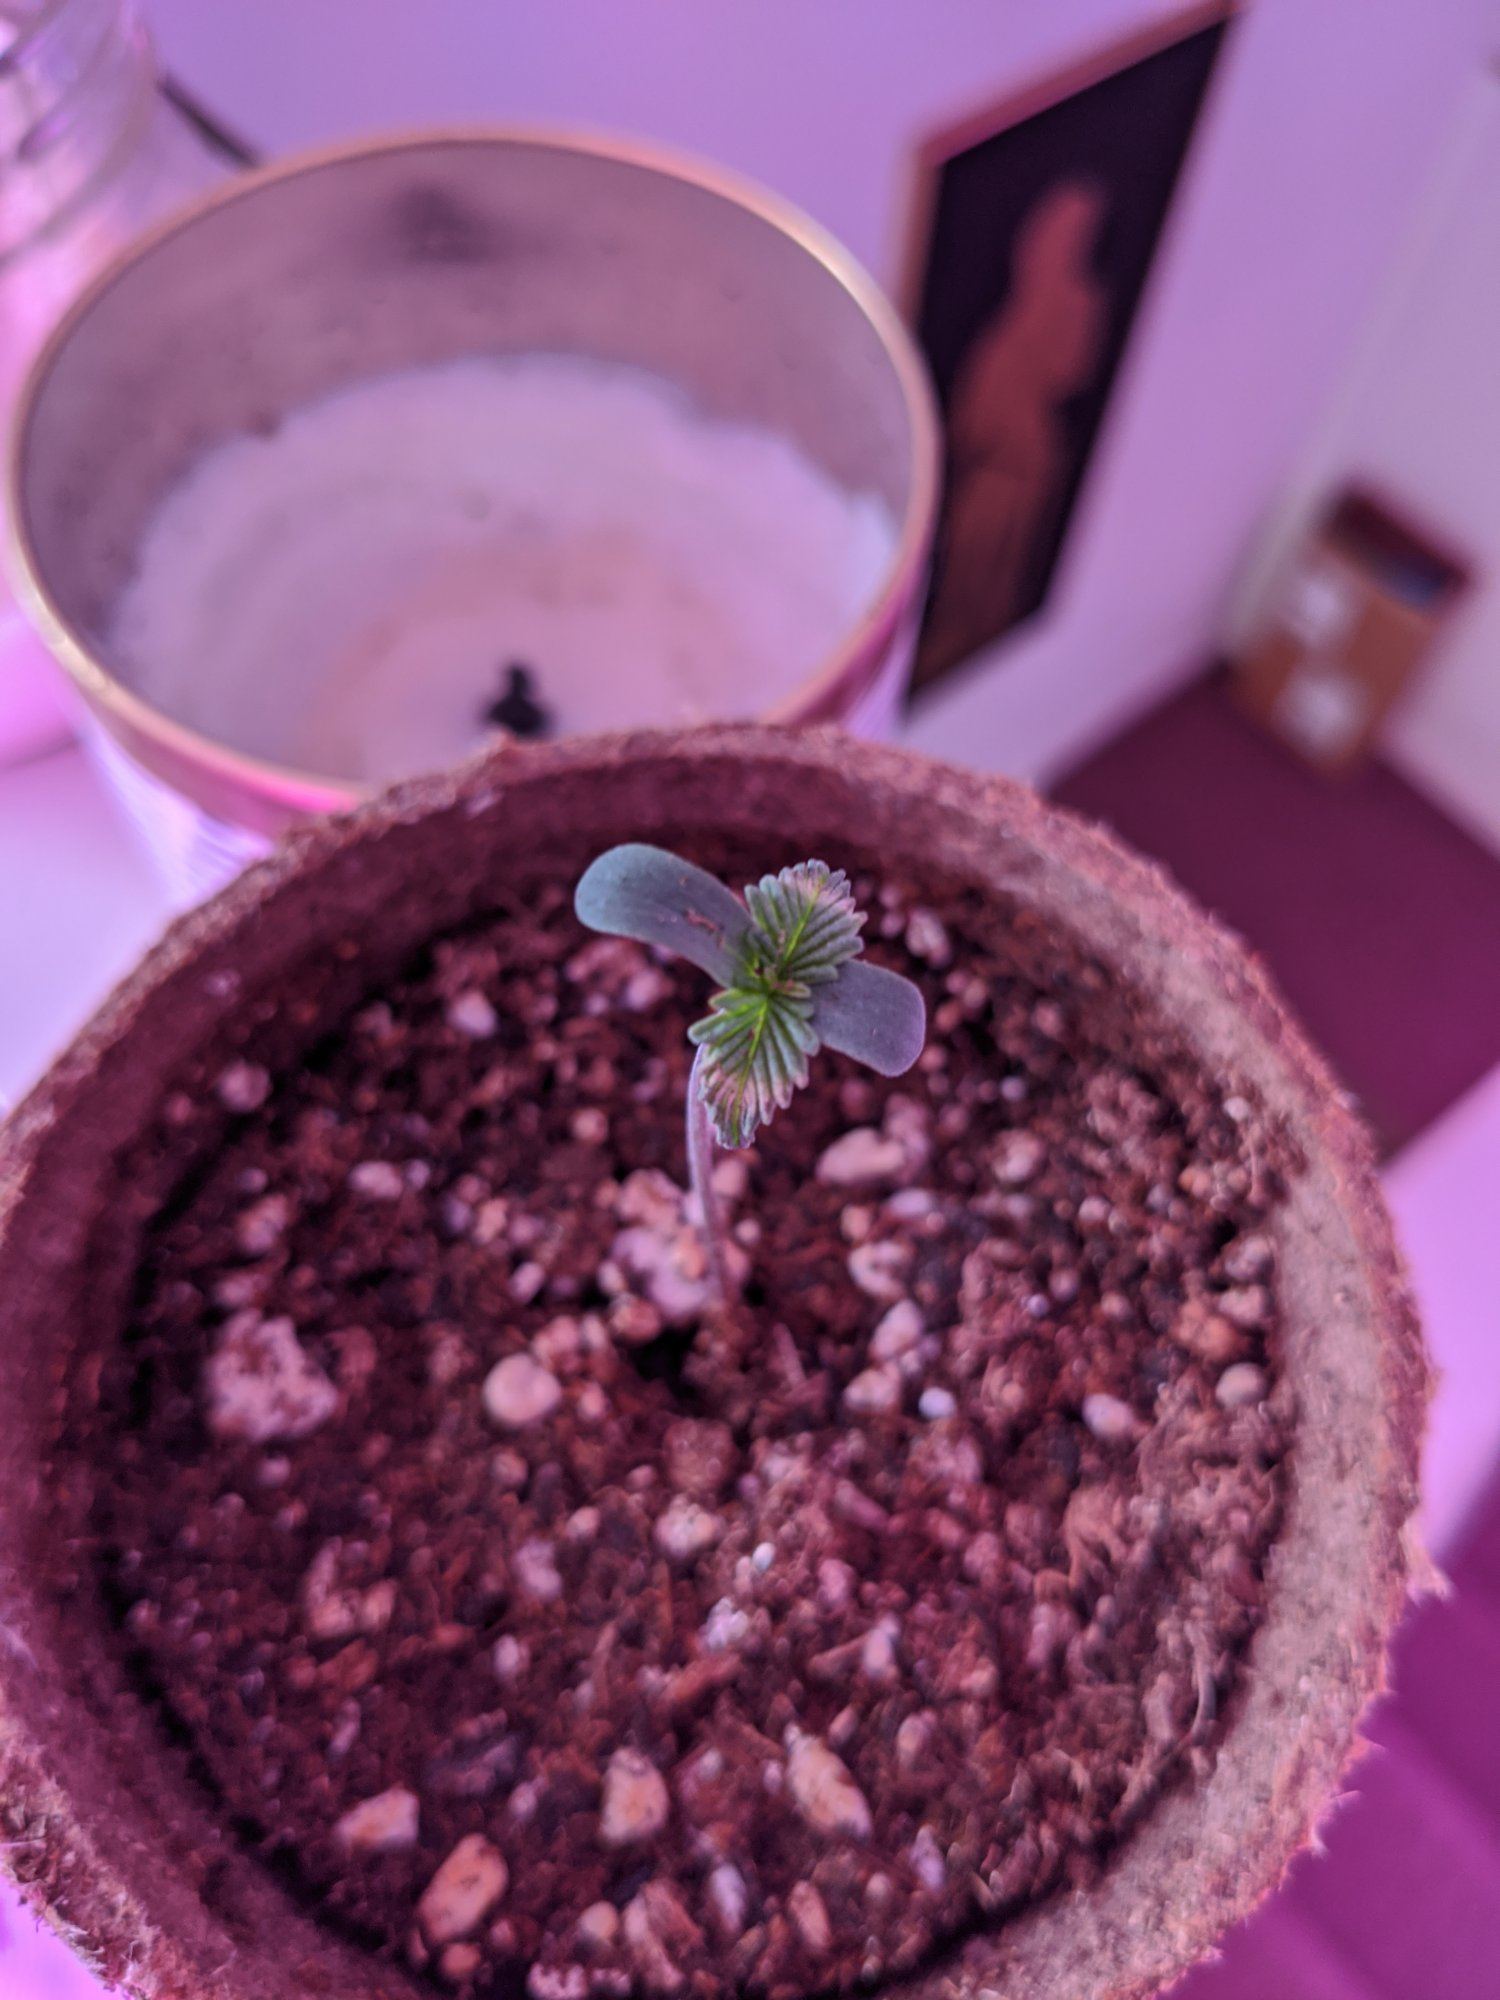 Is this light damage from leds or over watering